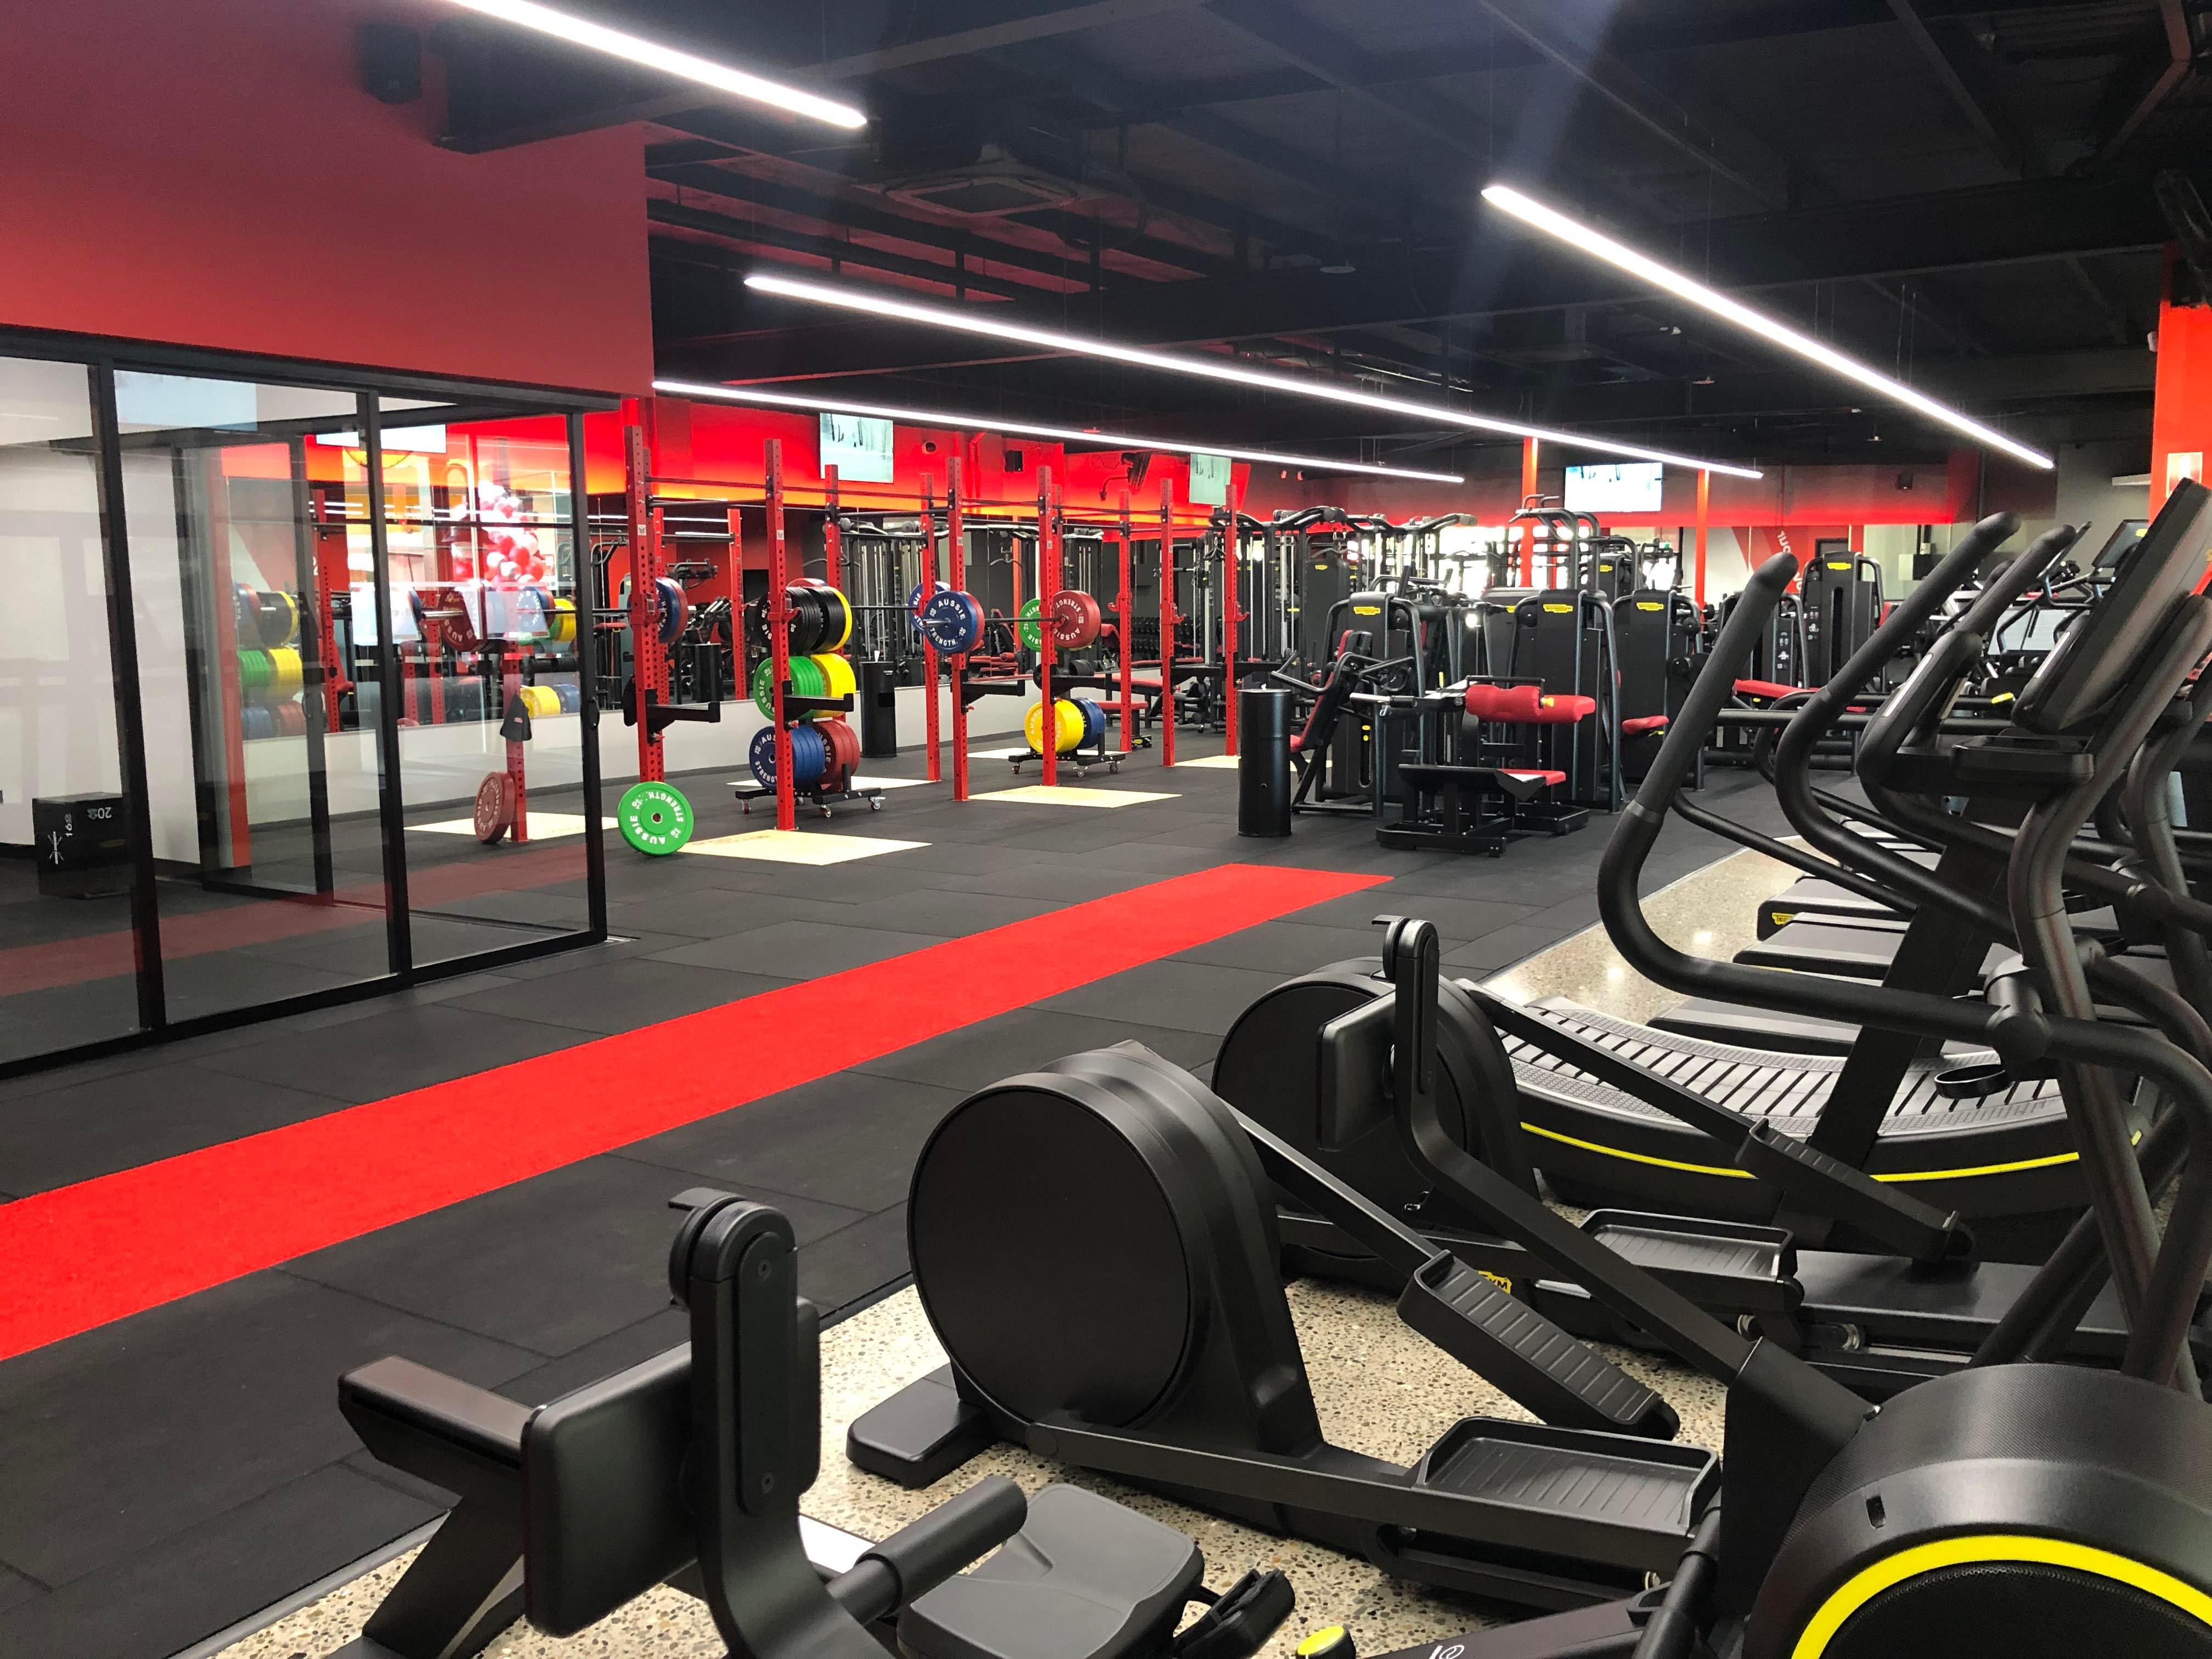 Rowing Machine, Weights and Functional Fitness Areas Snap Fitness 24/7 Mayfield Mayfield 0422 426 596